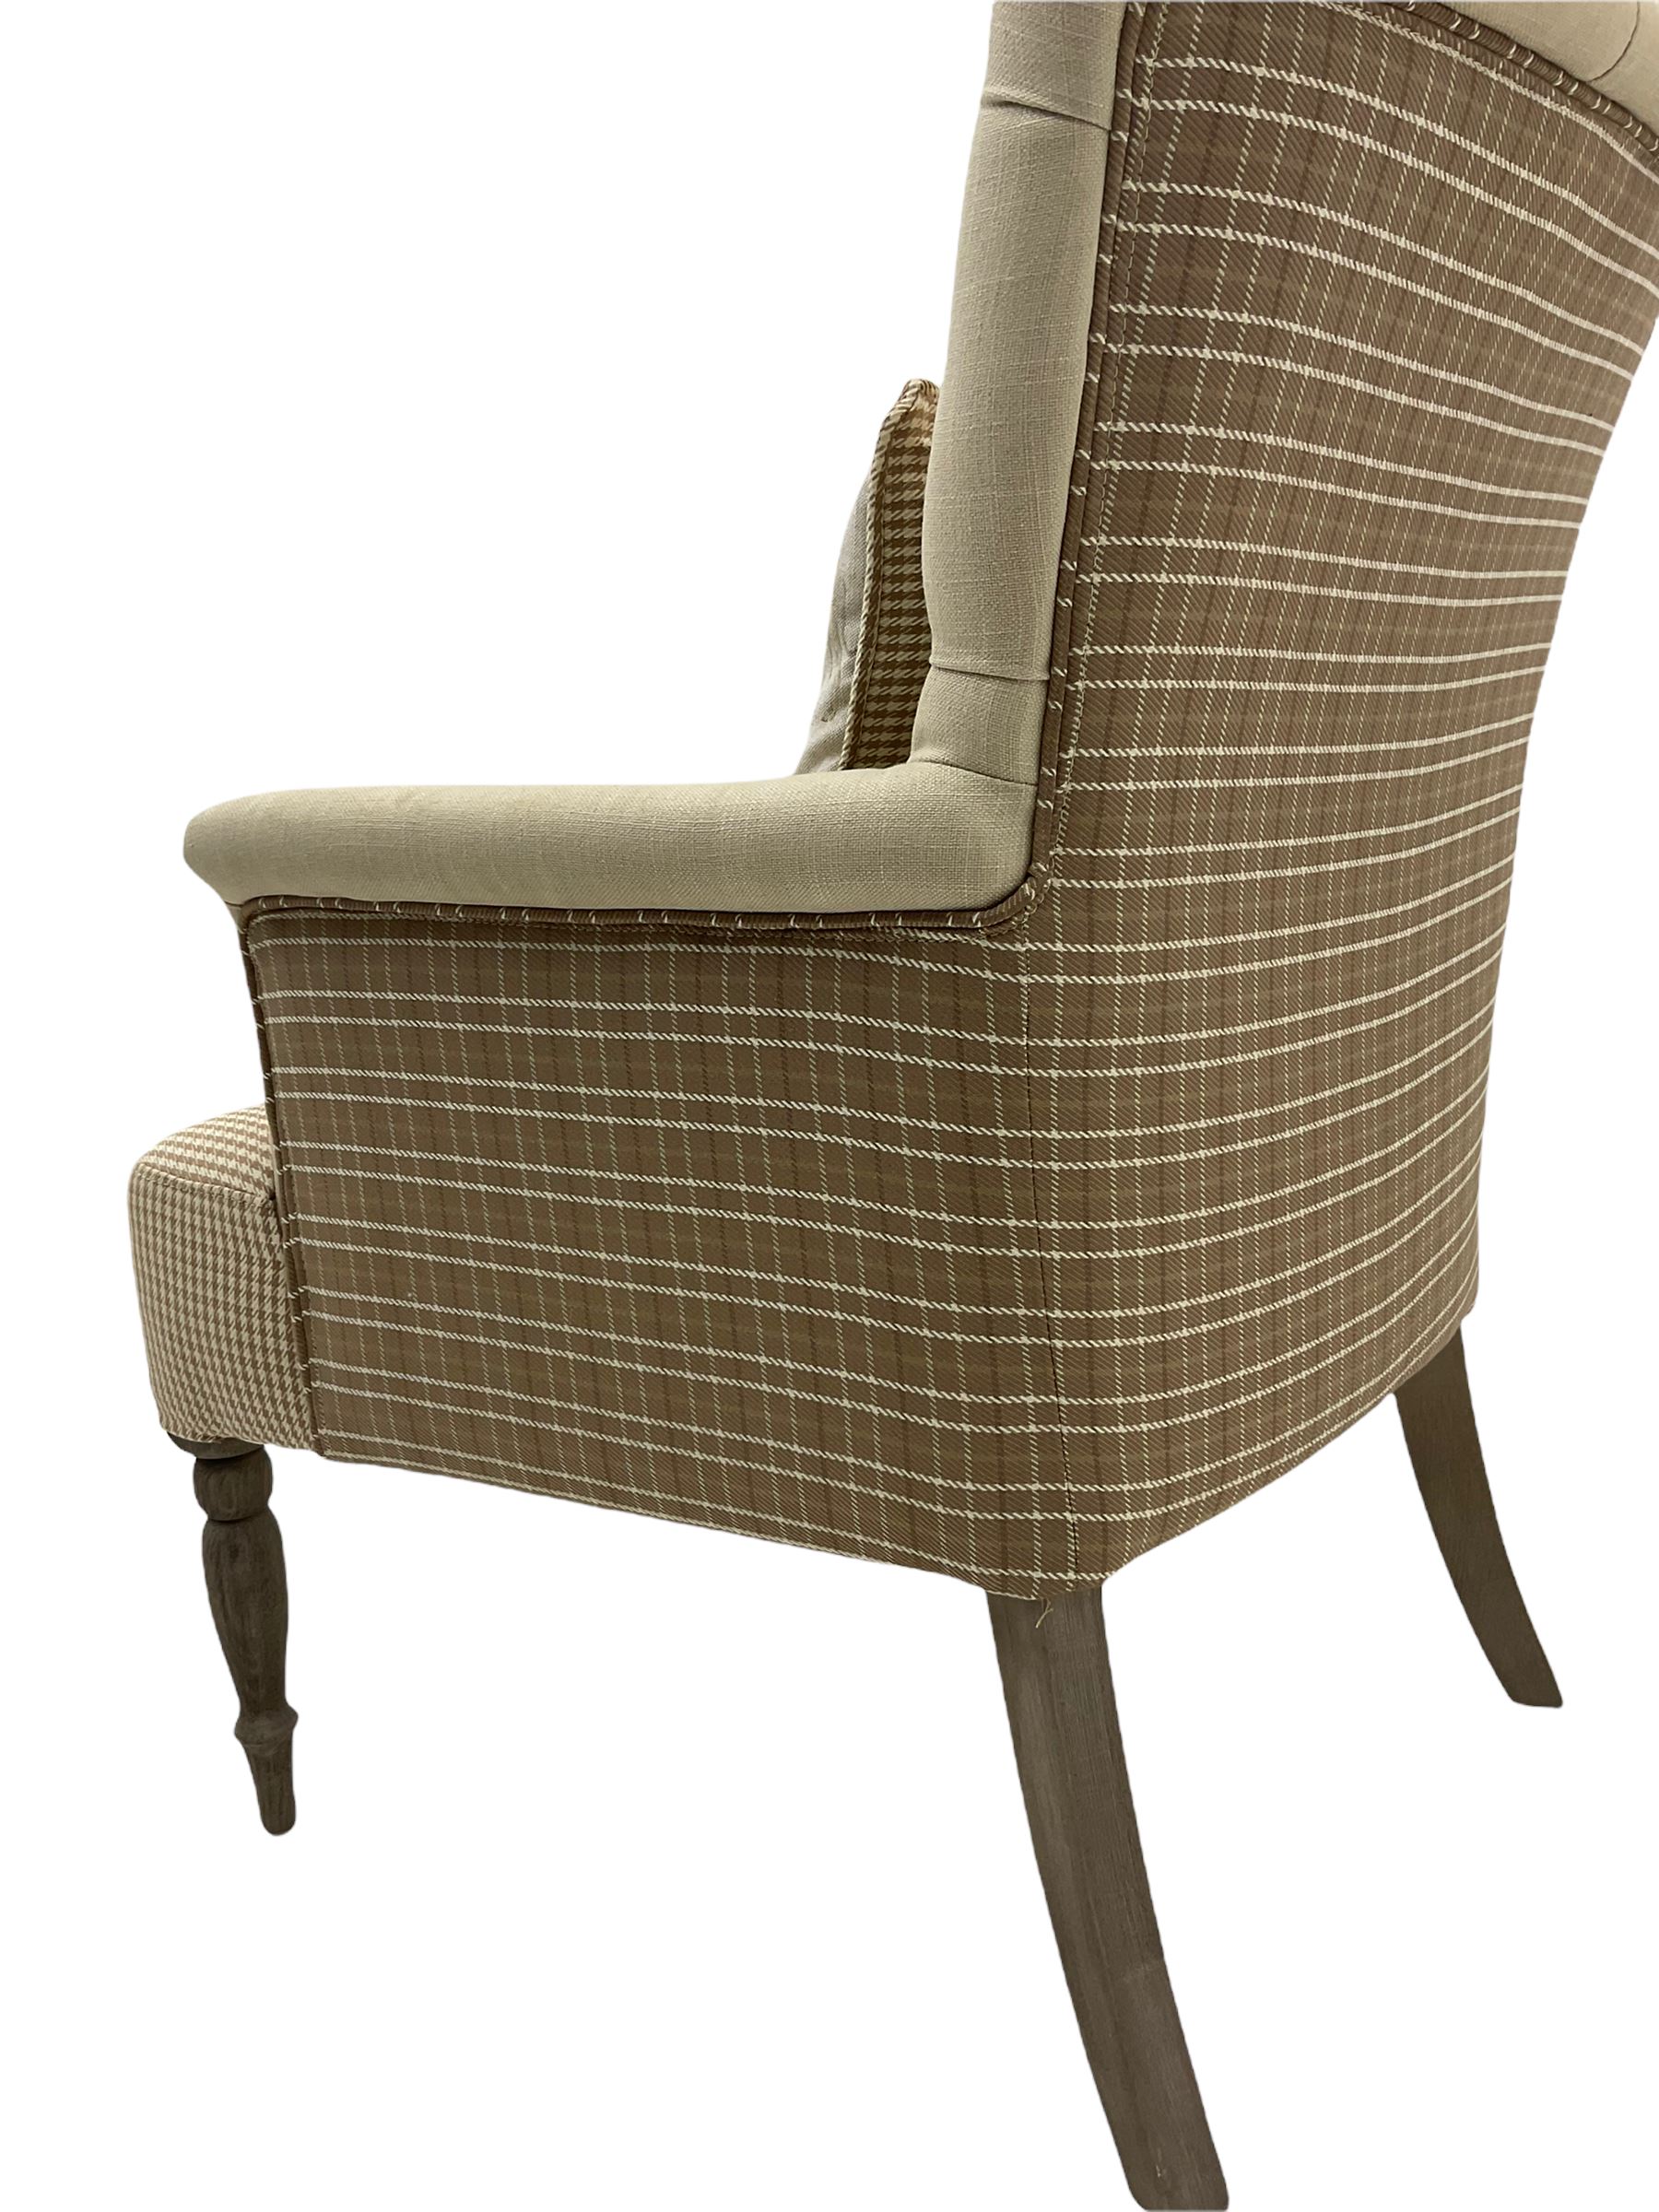 Voyage Maisonette - Nero Armchair upholstered in beige and check fabric - Image 7 of 8